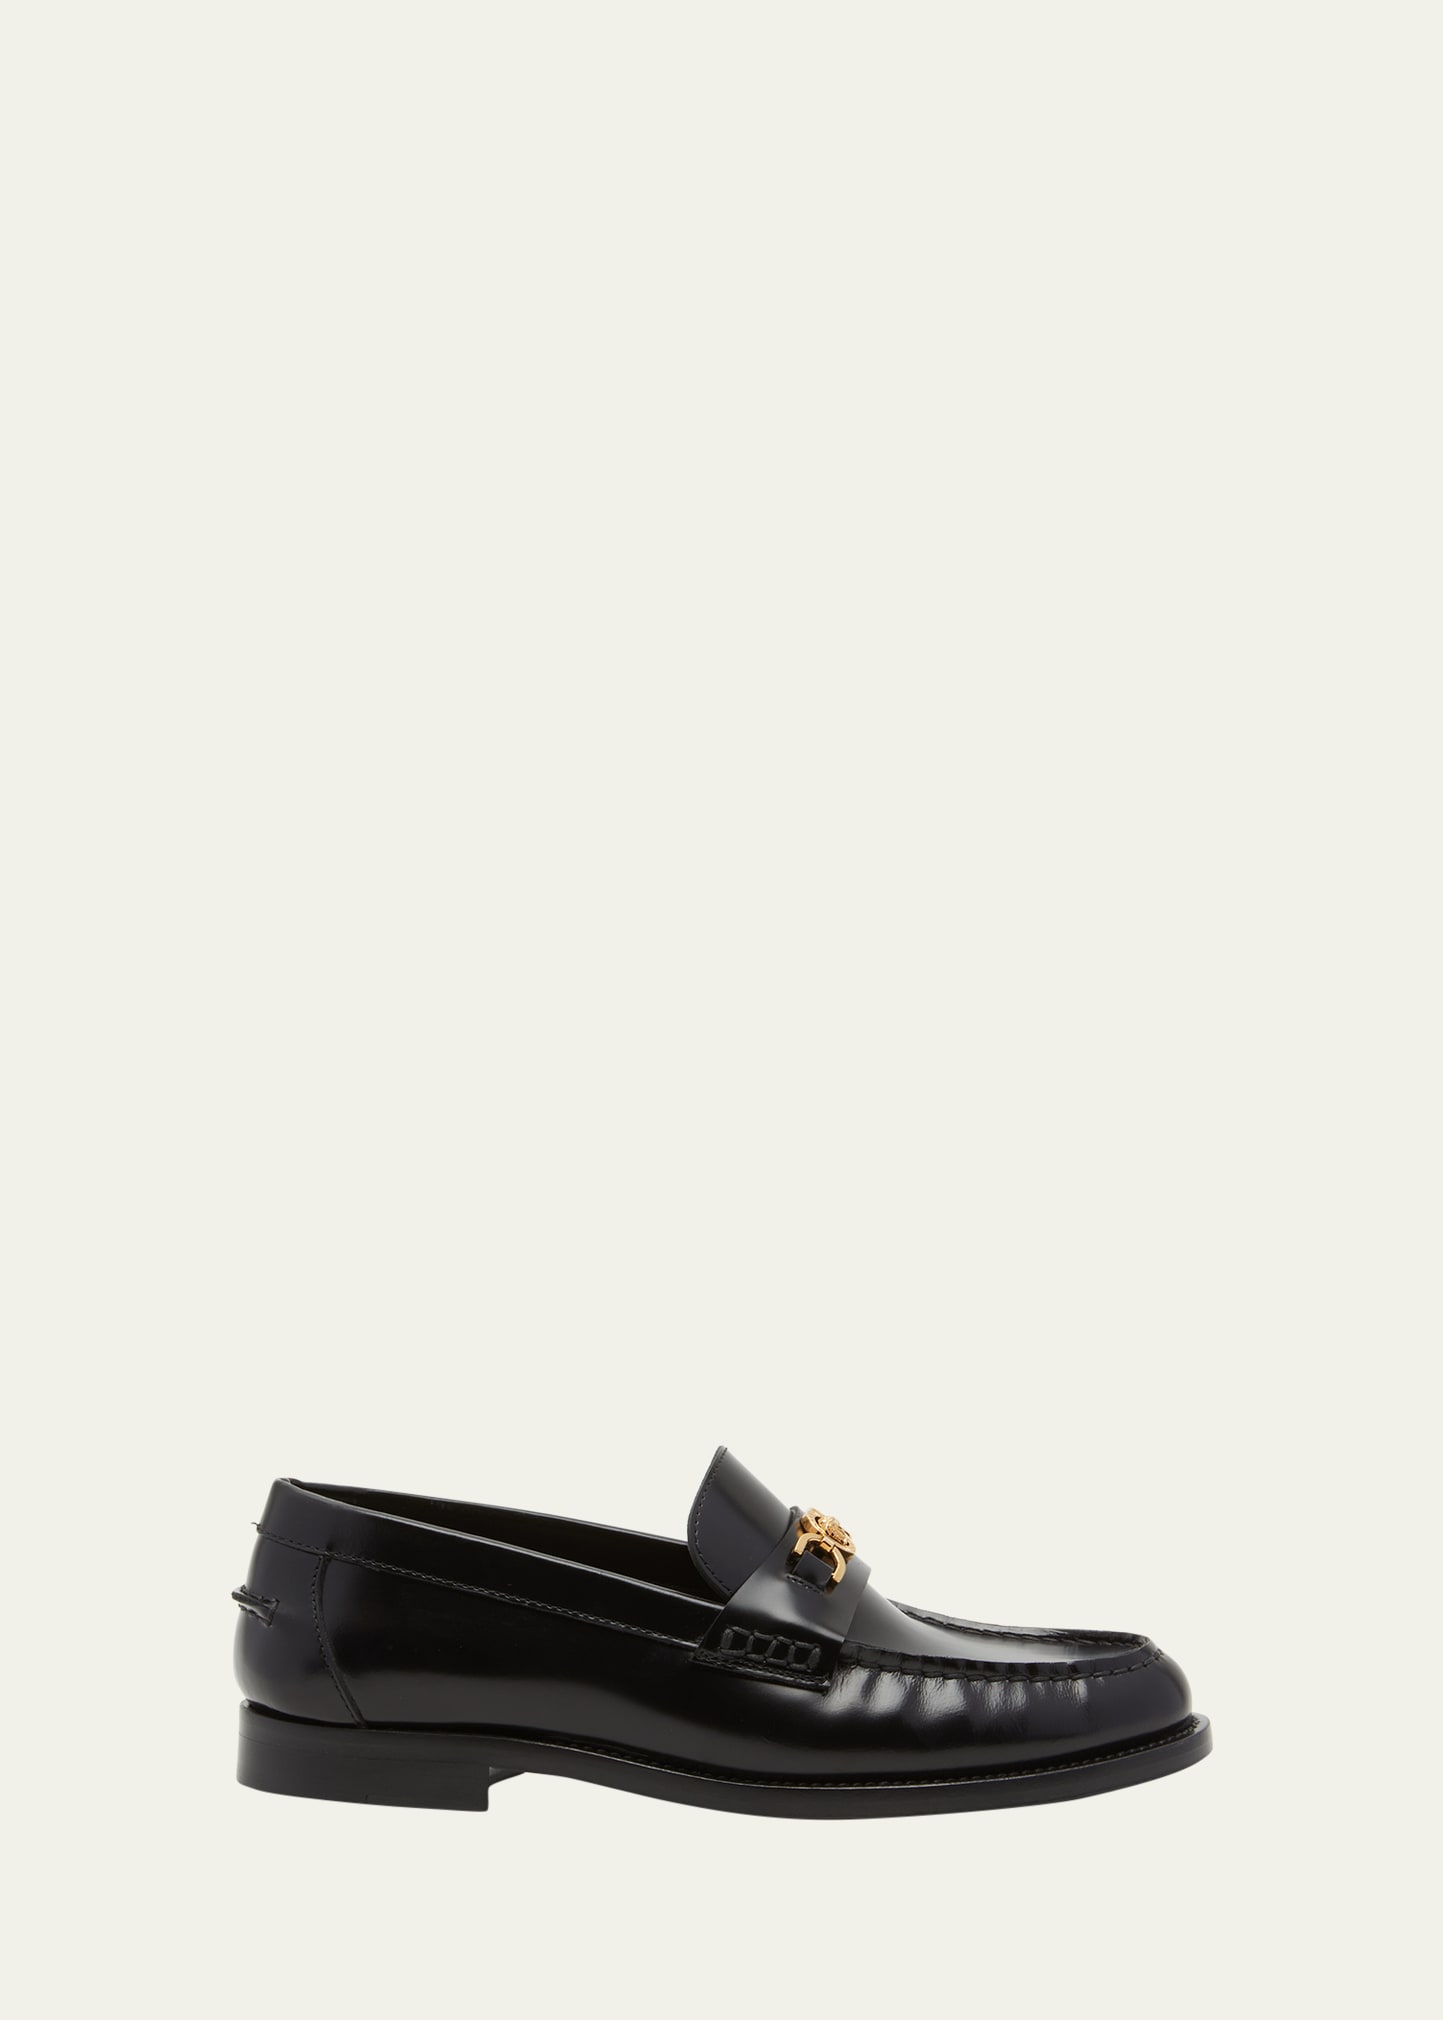 VERSACE MEDUSA CHAIN LEATHER LOAFERS